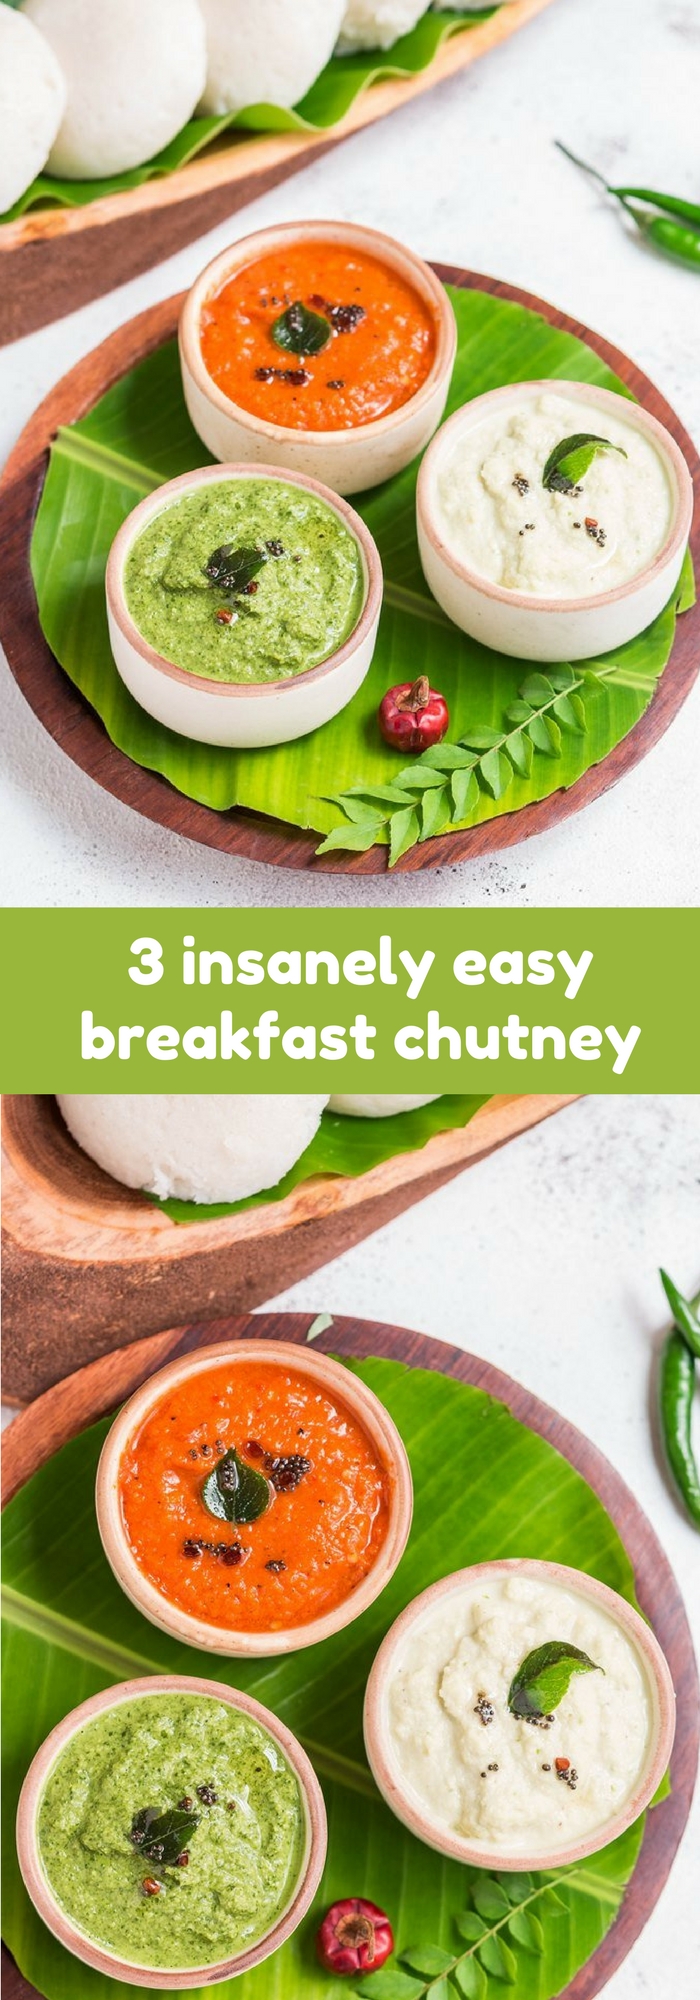 South Indian Breakfast Chutney Recipe with Text Overlay